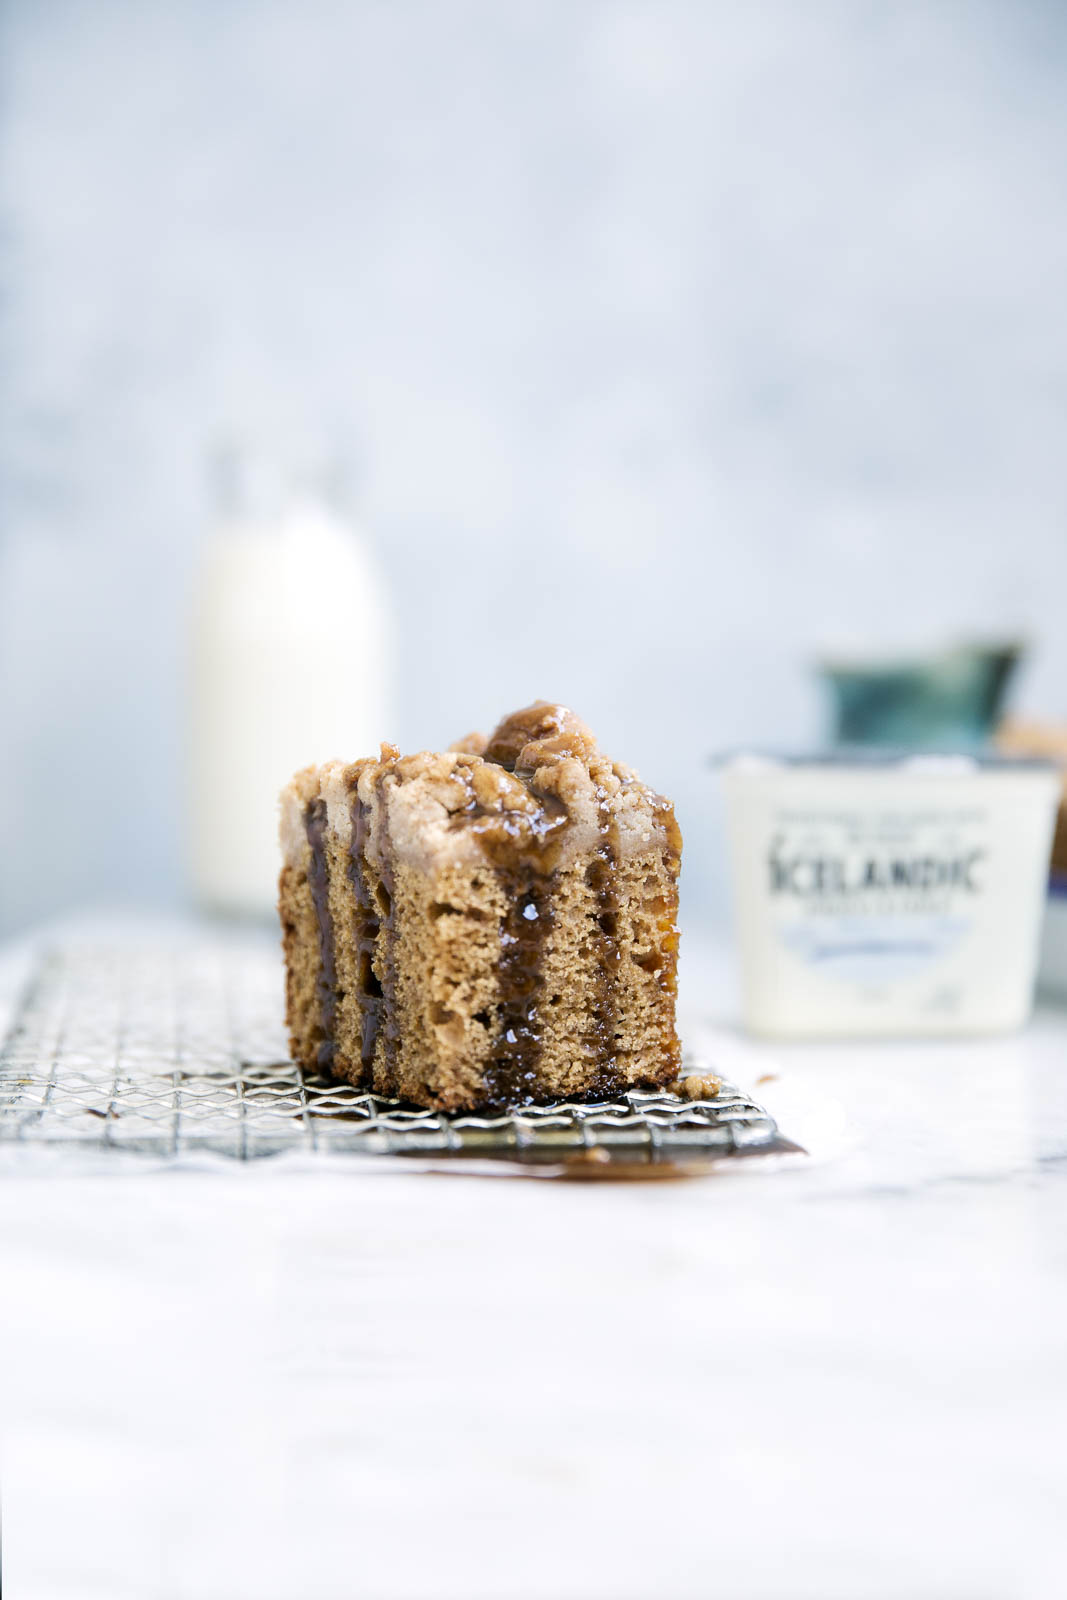 Perfectly spiced and super moist, this Icelandic skyr spice cake is topped with a ridiculously addicting crumb topping and toffee sauce!